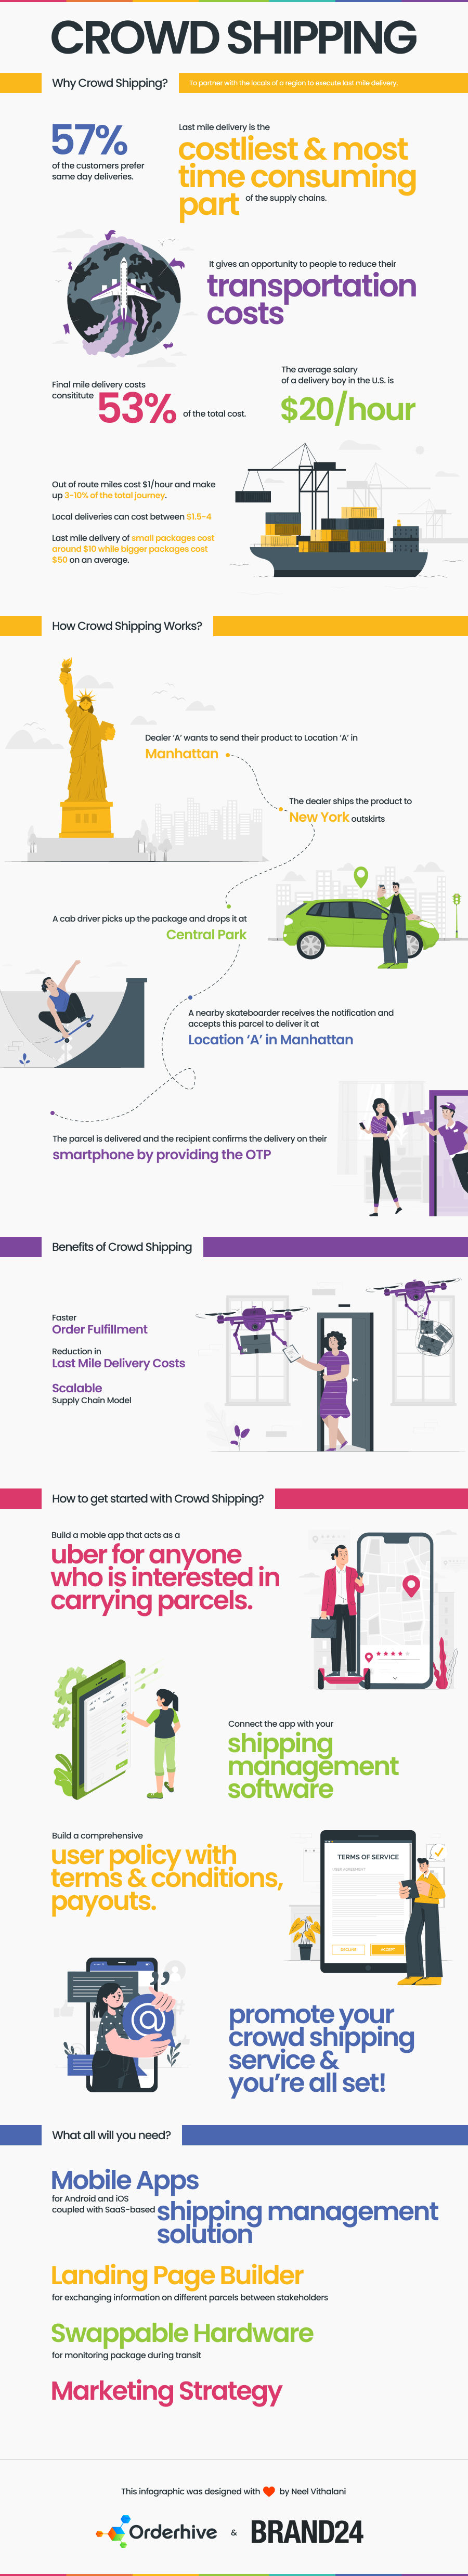 Crowd Shipping Infographic